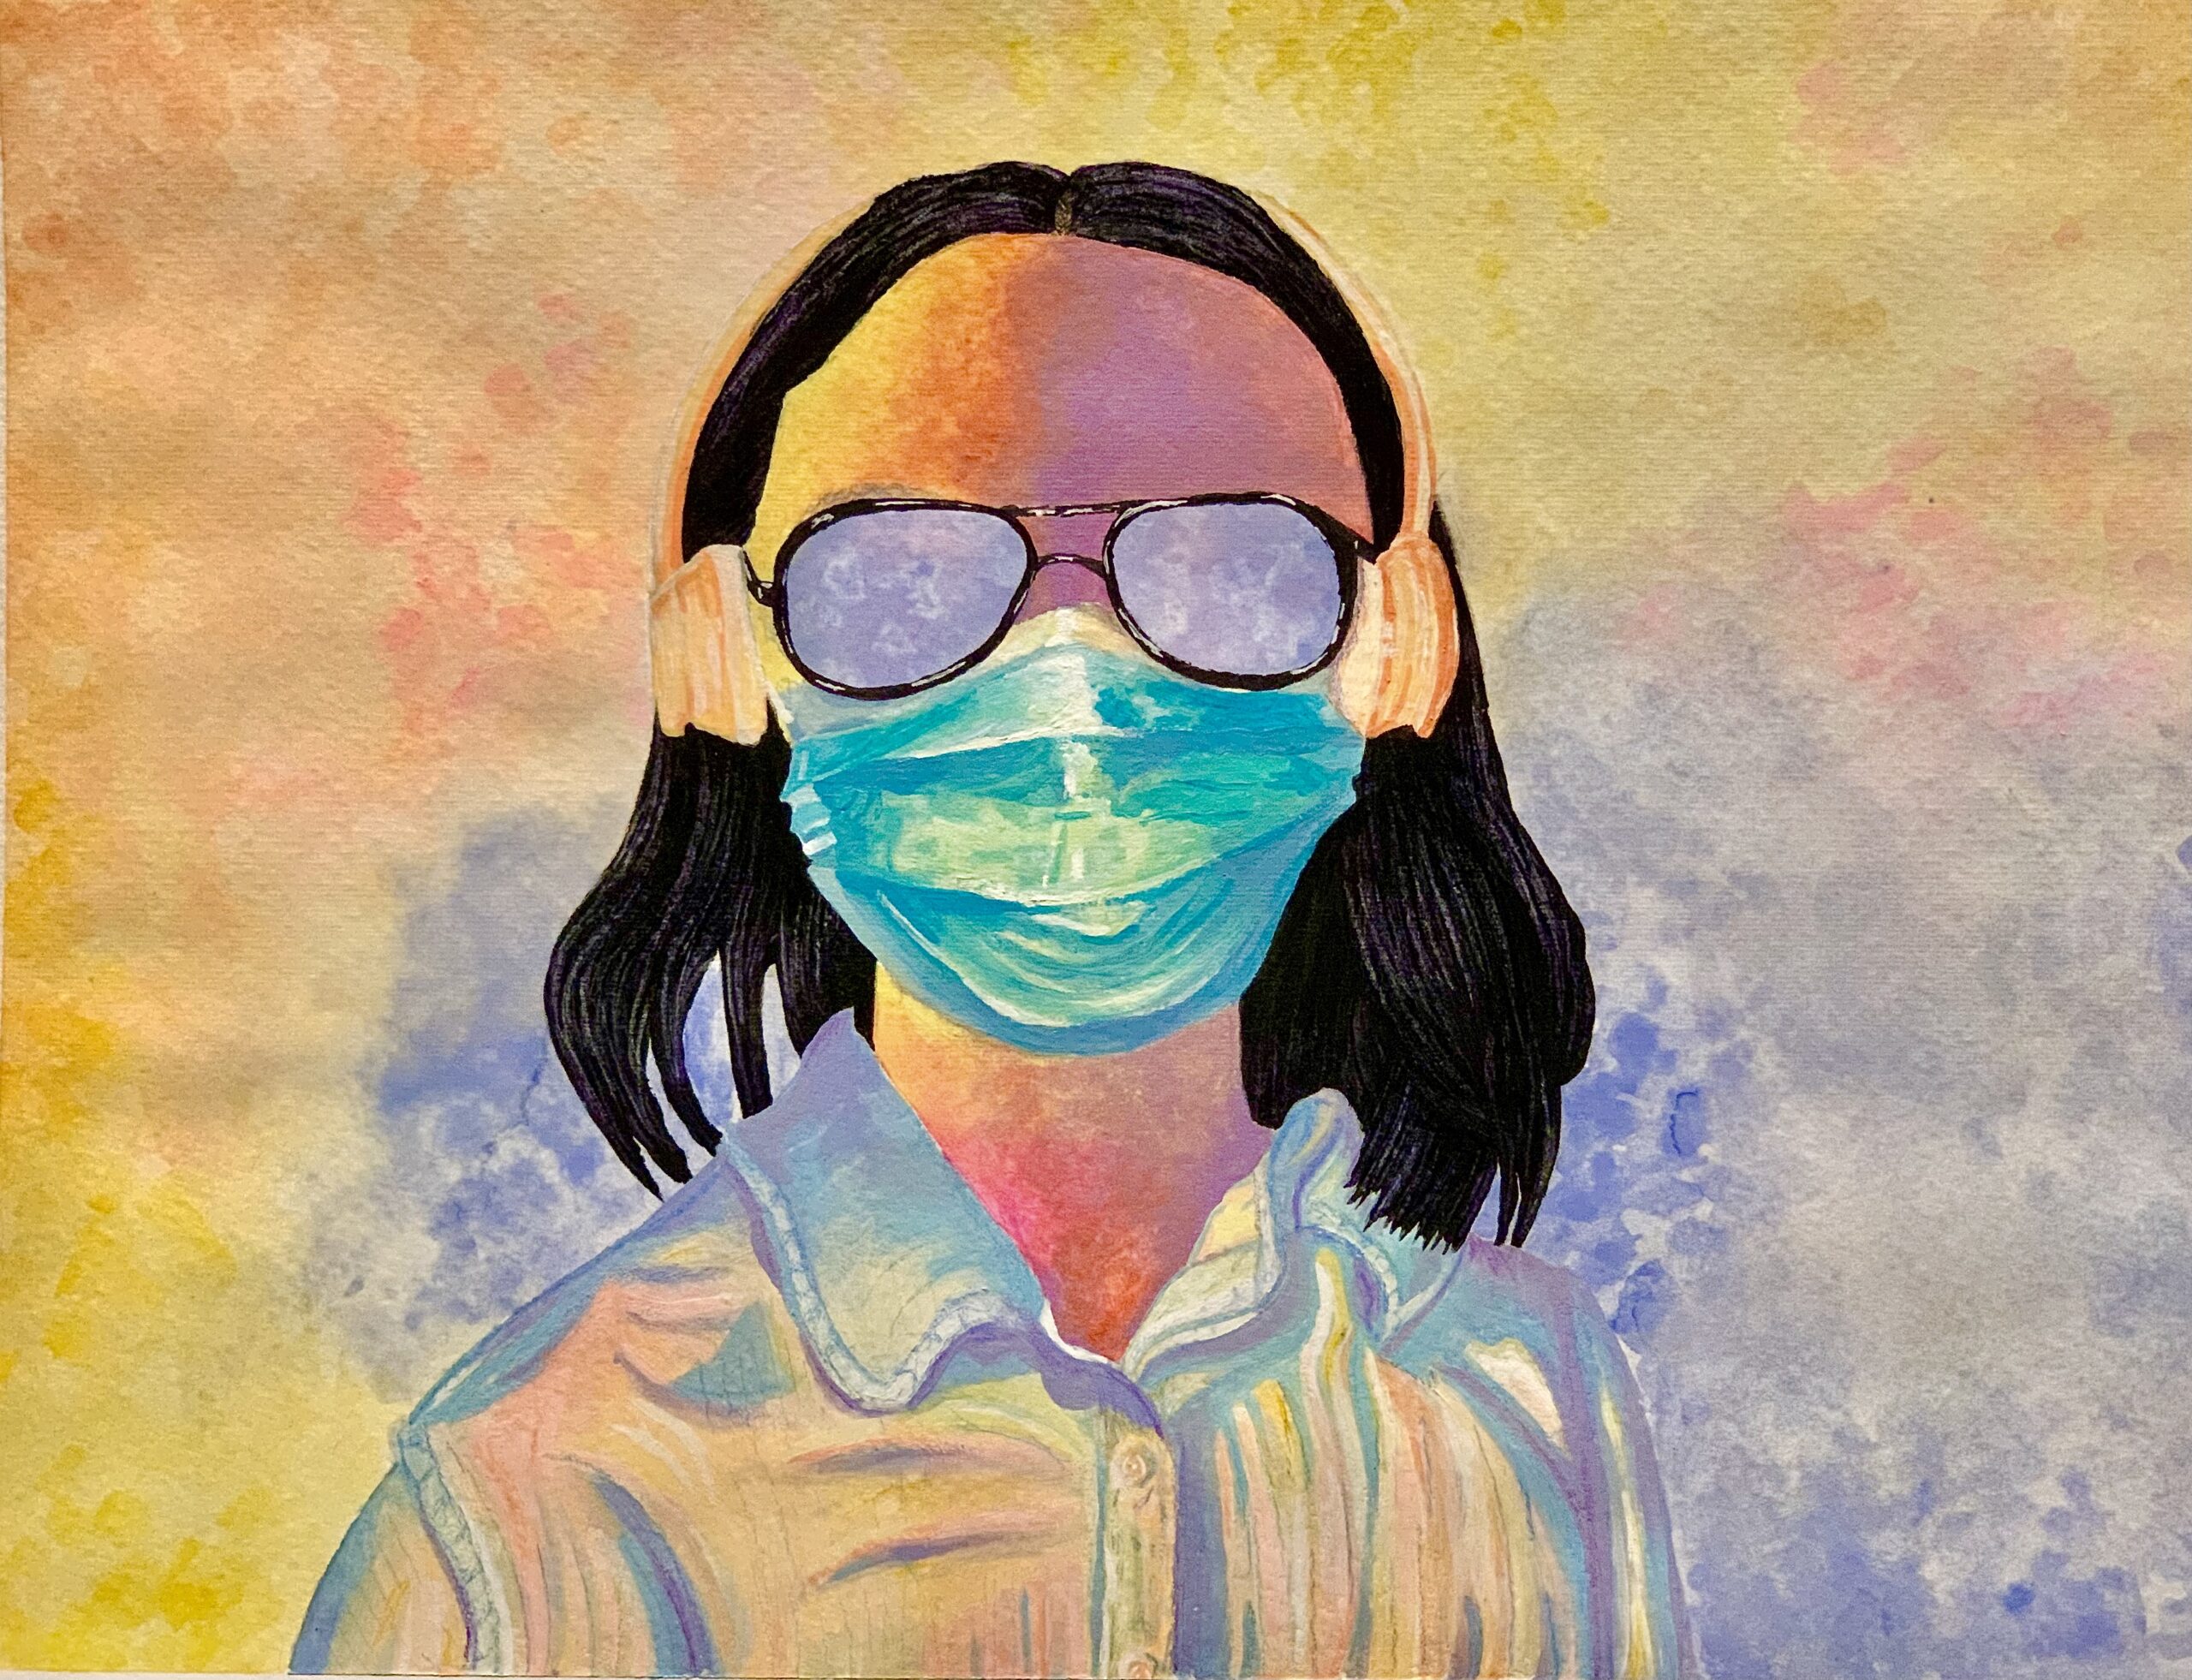 Painting showing someone wearing a white collared shirt with aviator like sunglasses and a mask